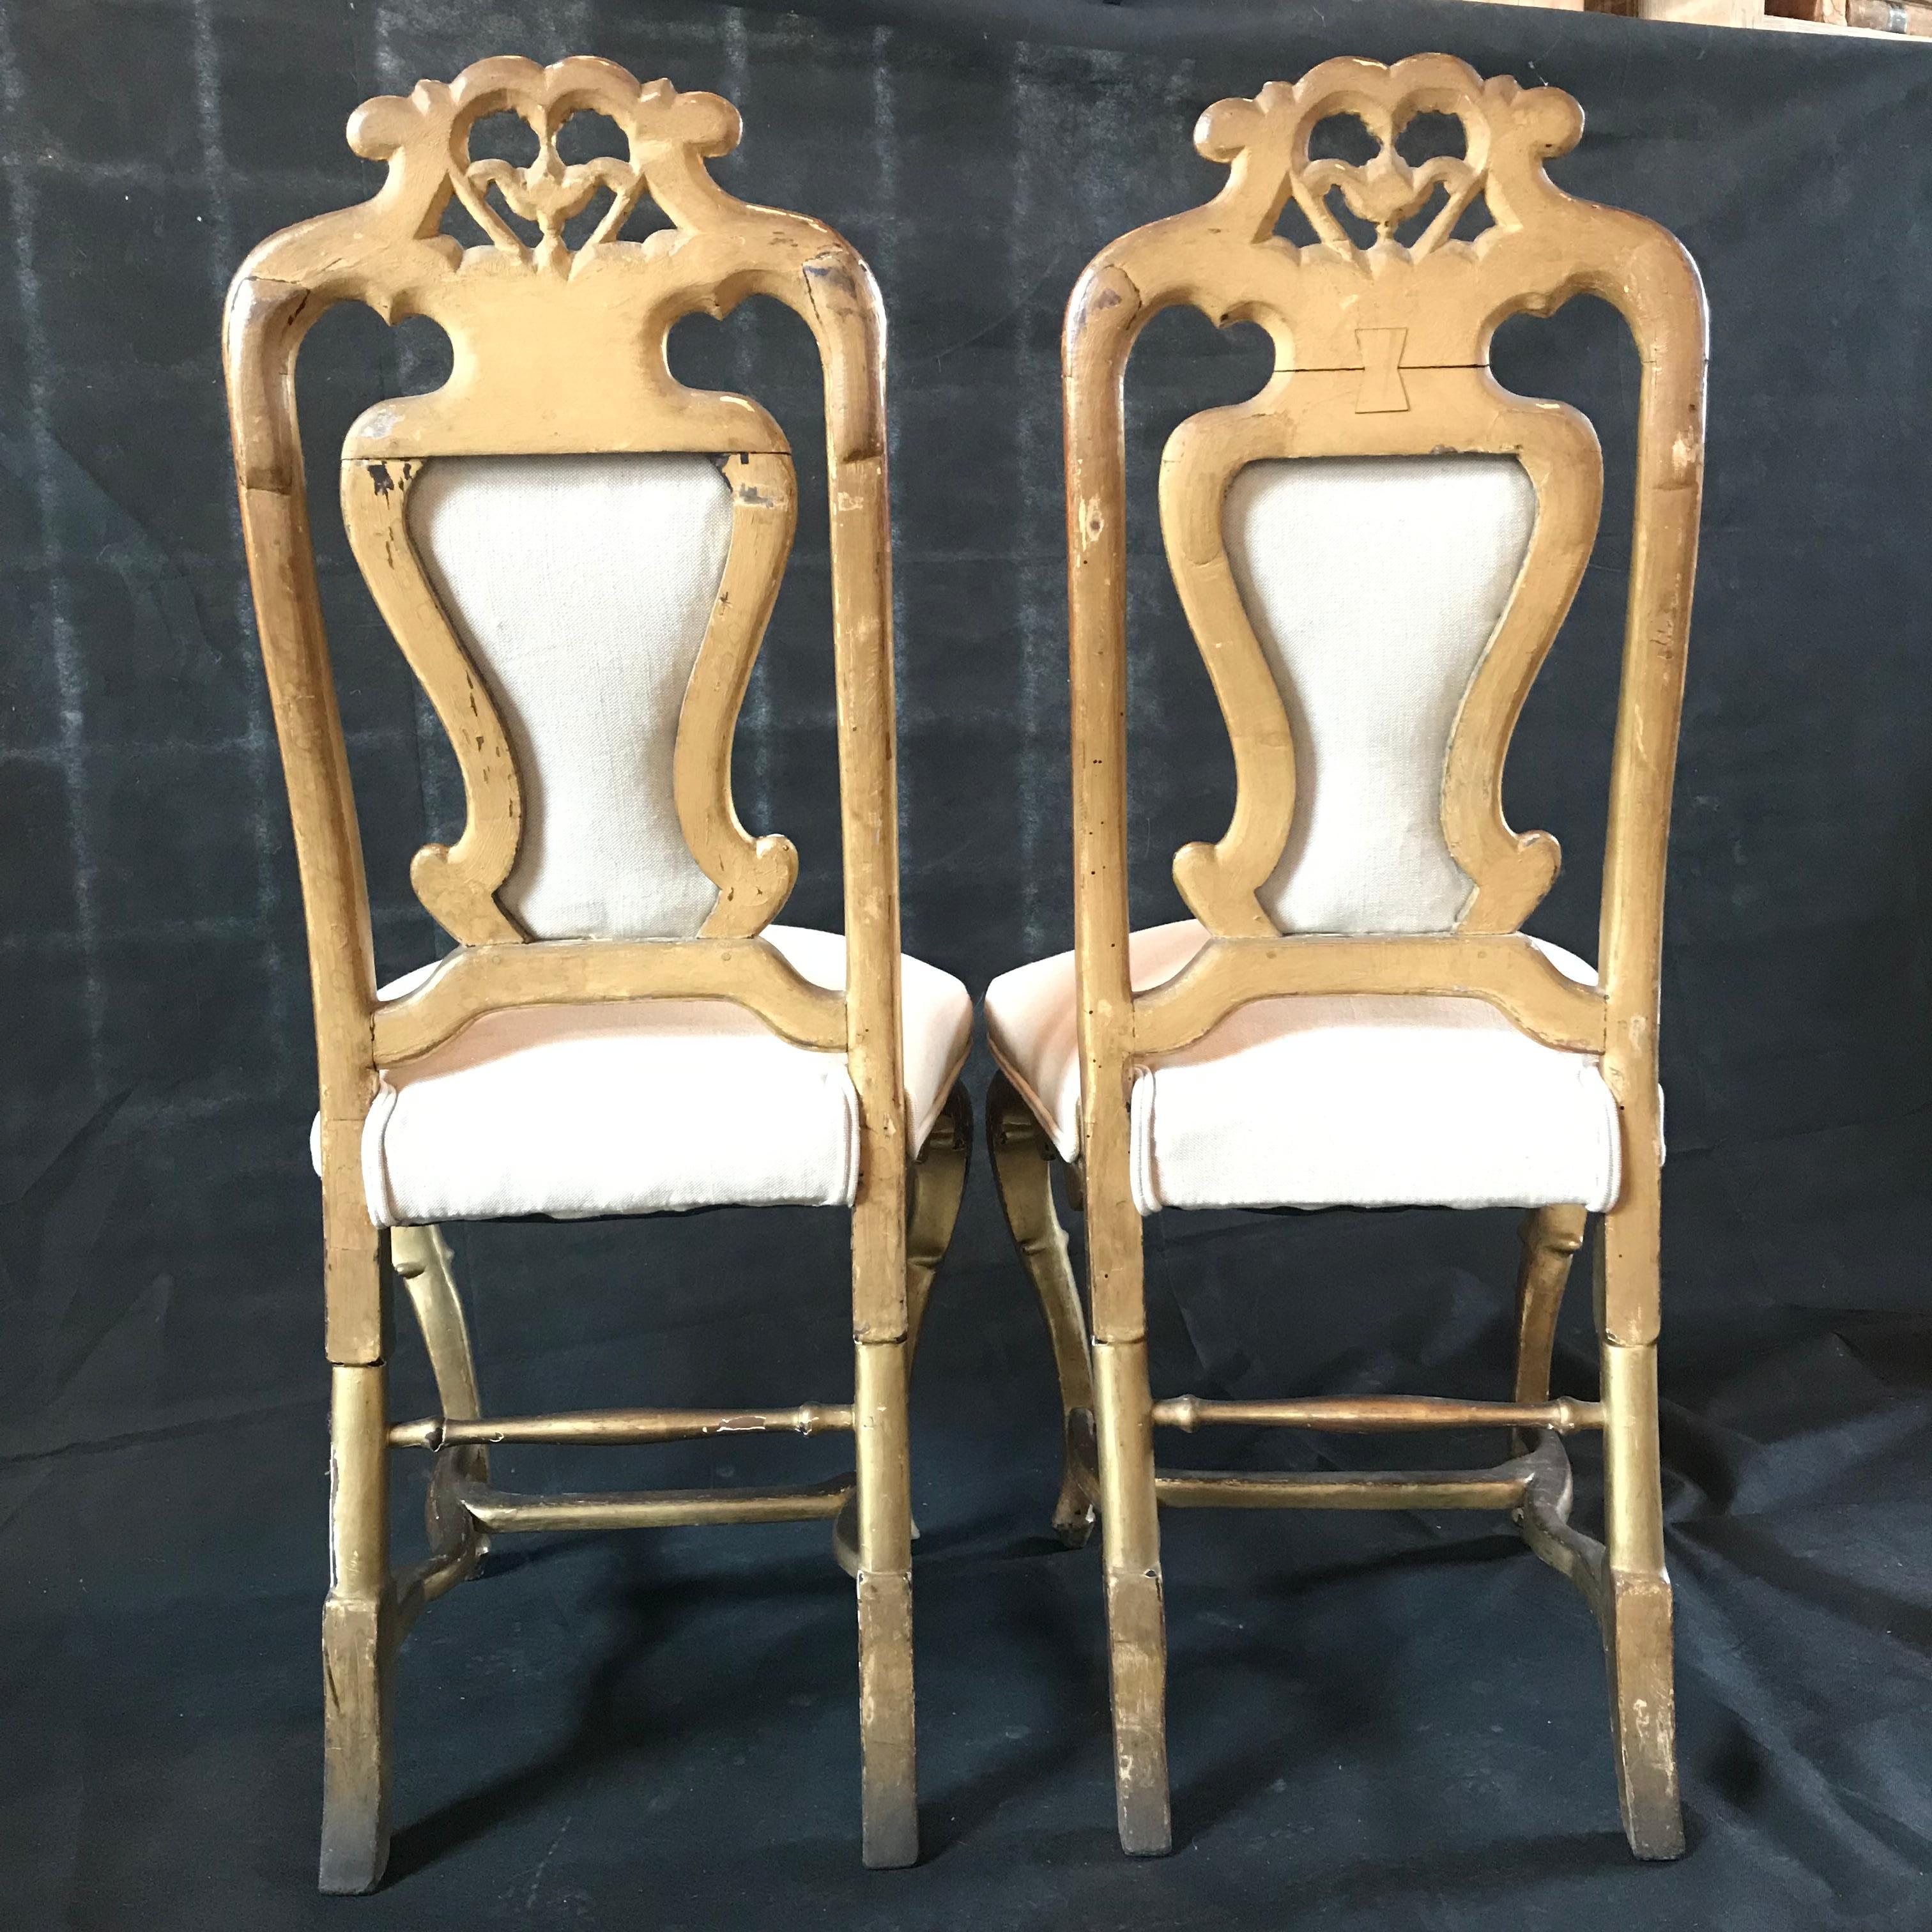 
Lovely pair of French chairs bought in the south of France with really stunning original gold gilt paint from the 19th century. Chairs are newly reupholstered with a neutral high quality linen cotton blend. 
#5229
 H to seat 23.5